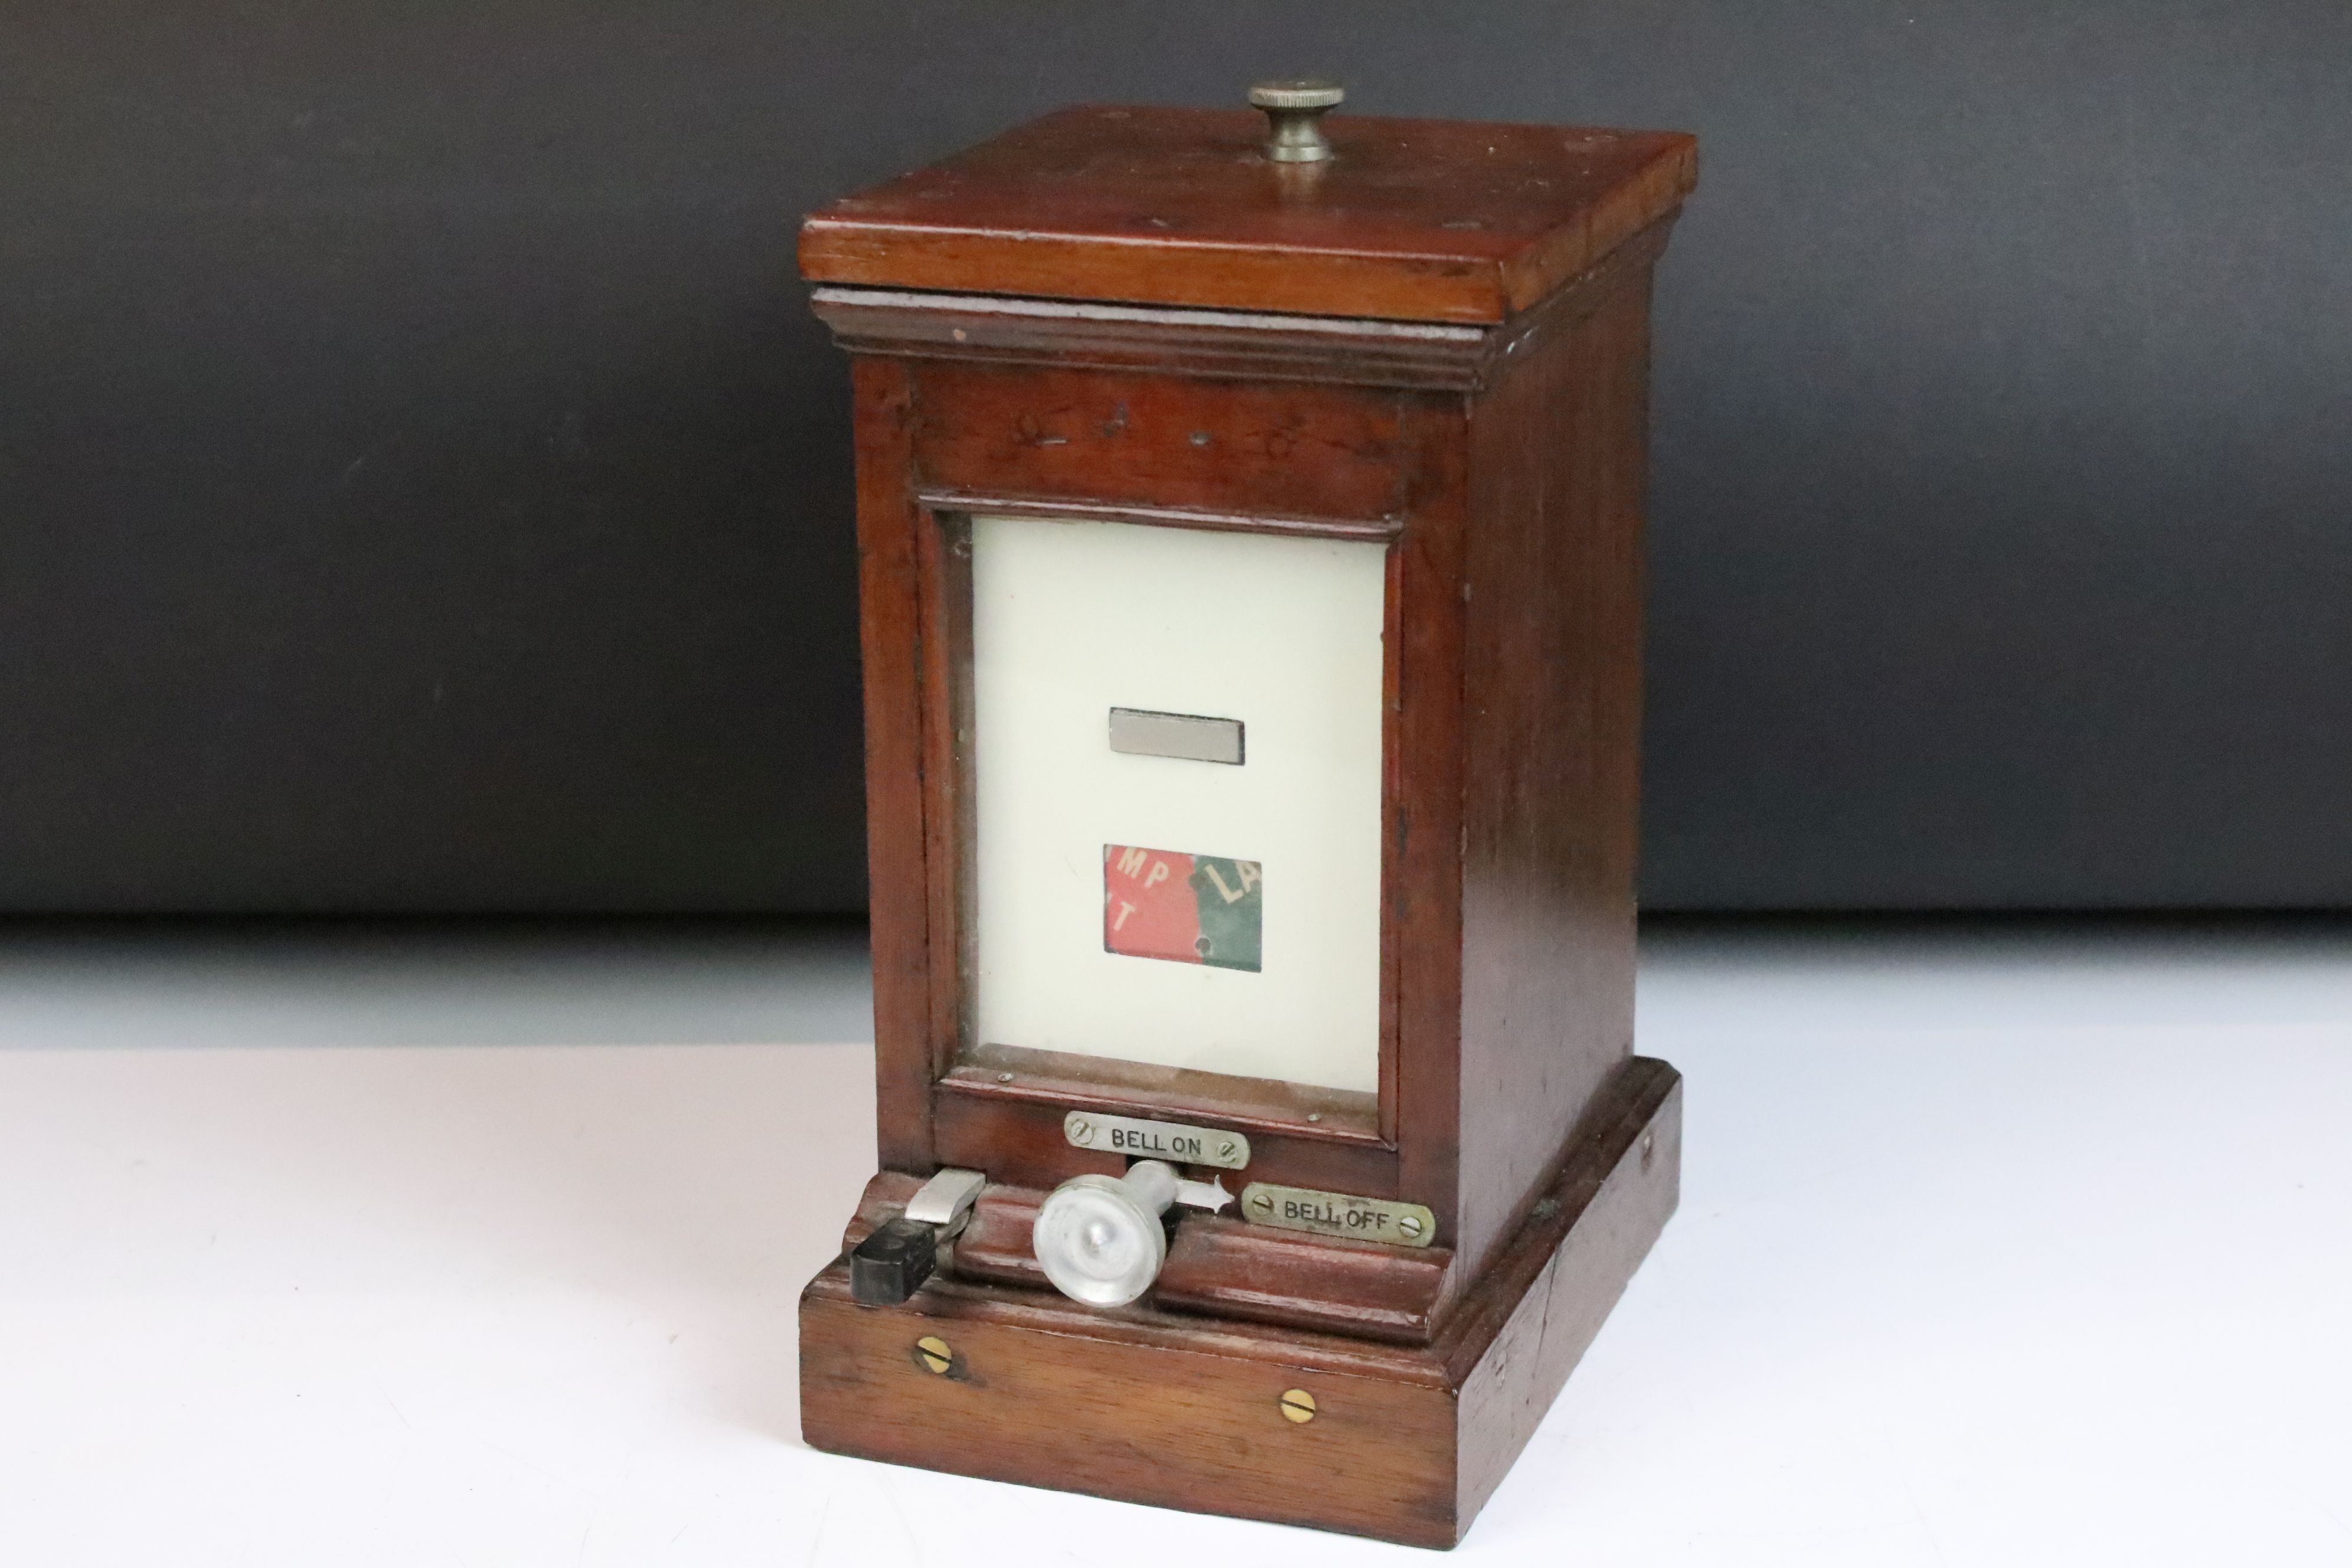 Railwayana - A Mid 20th C mahogany cased lamp repeater, with bell on/off switch. Measures approx